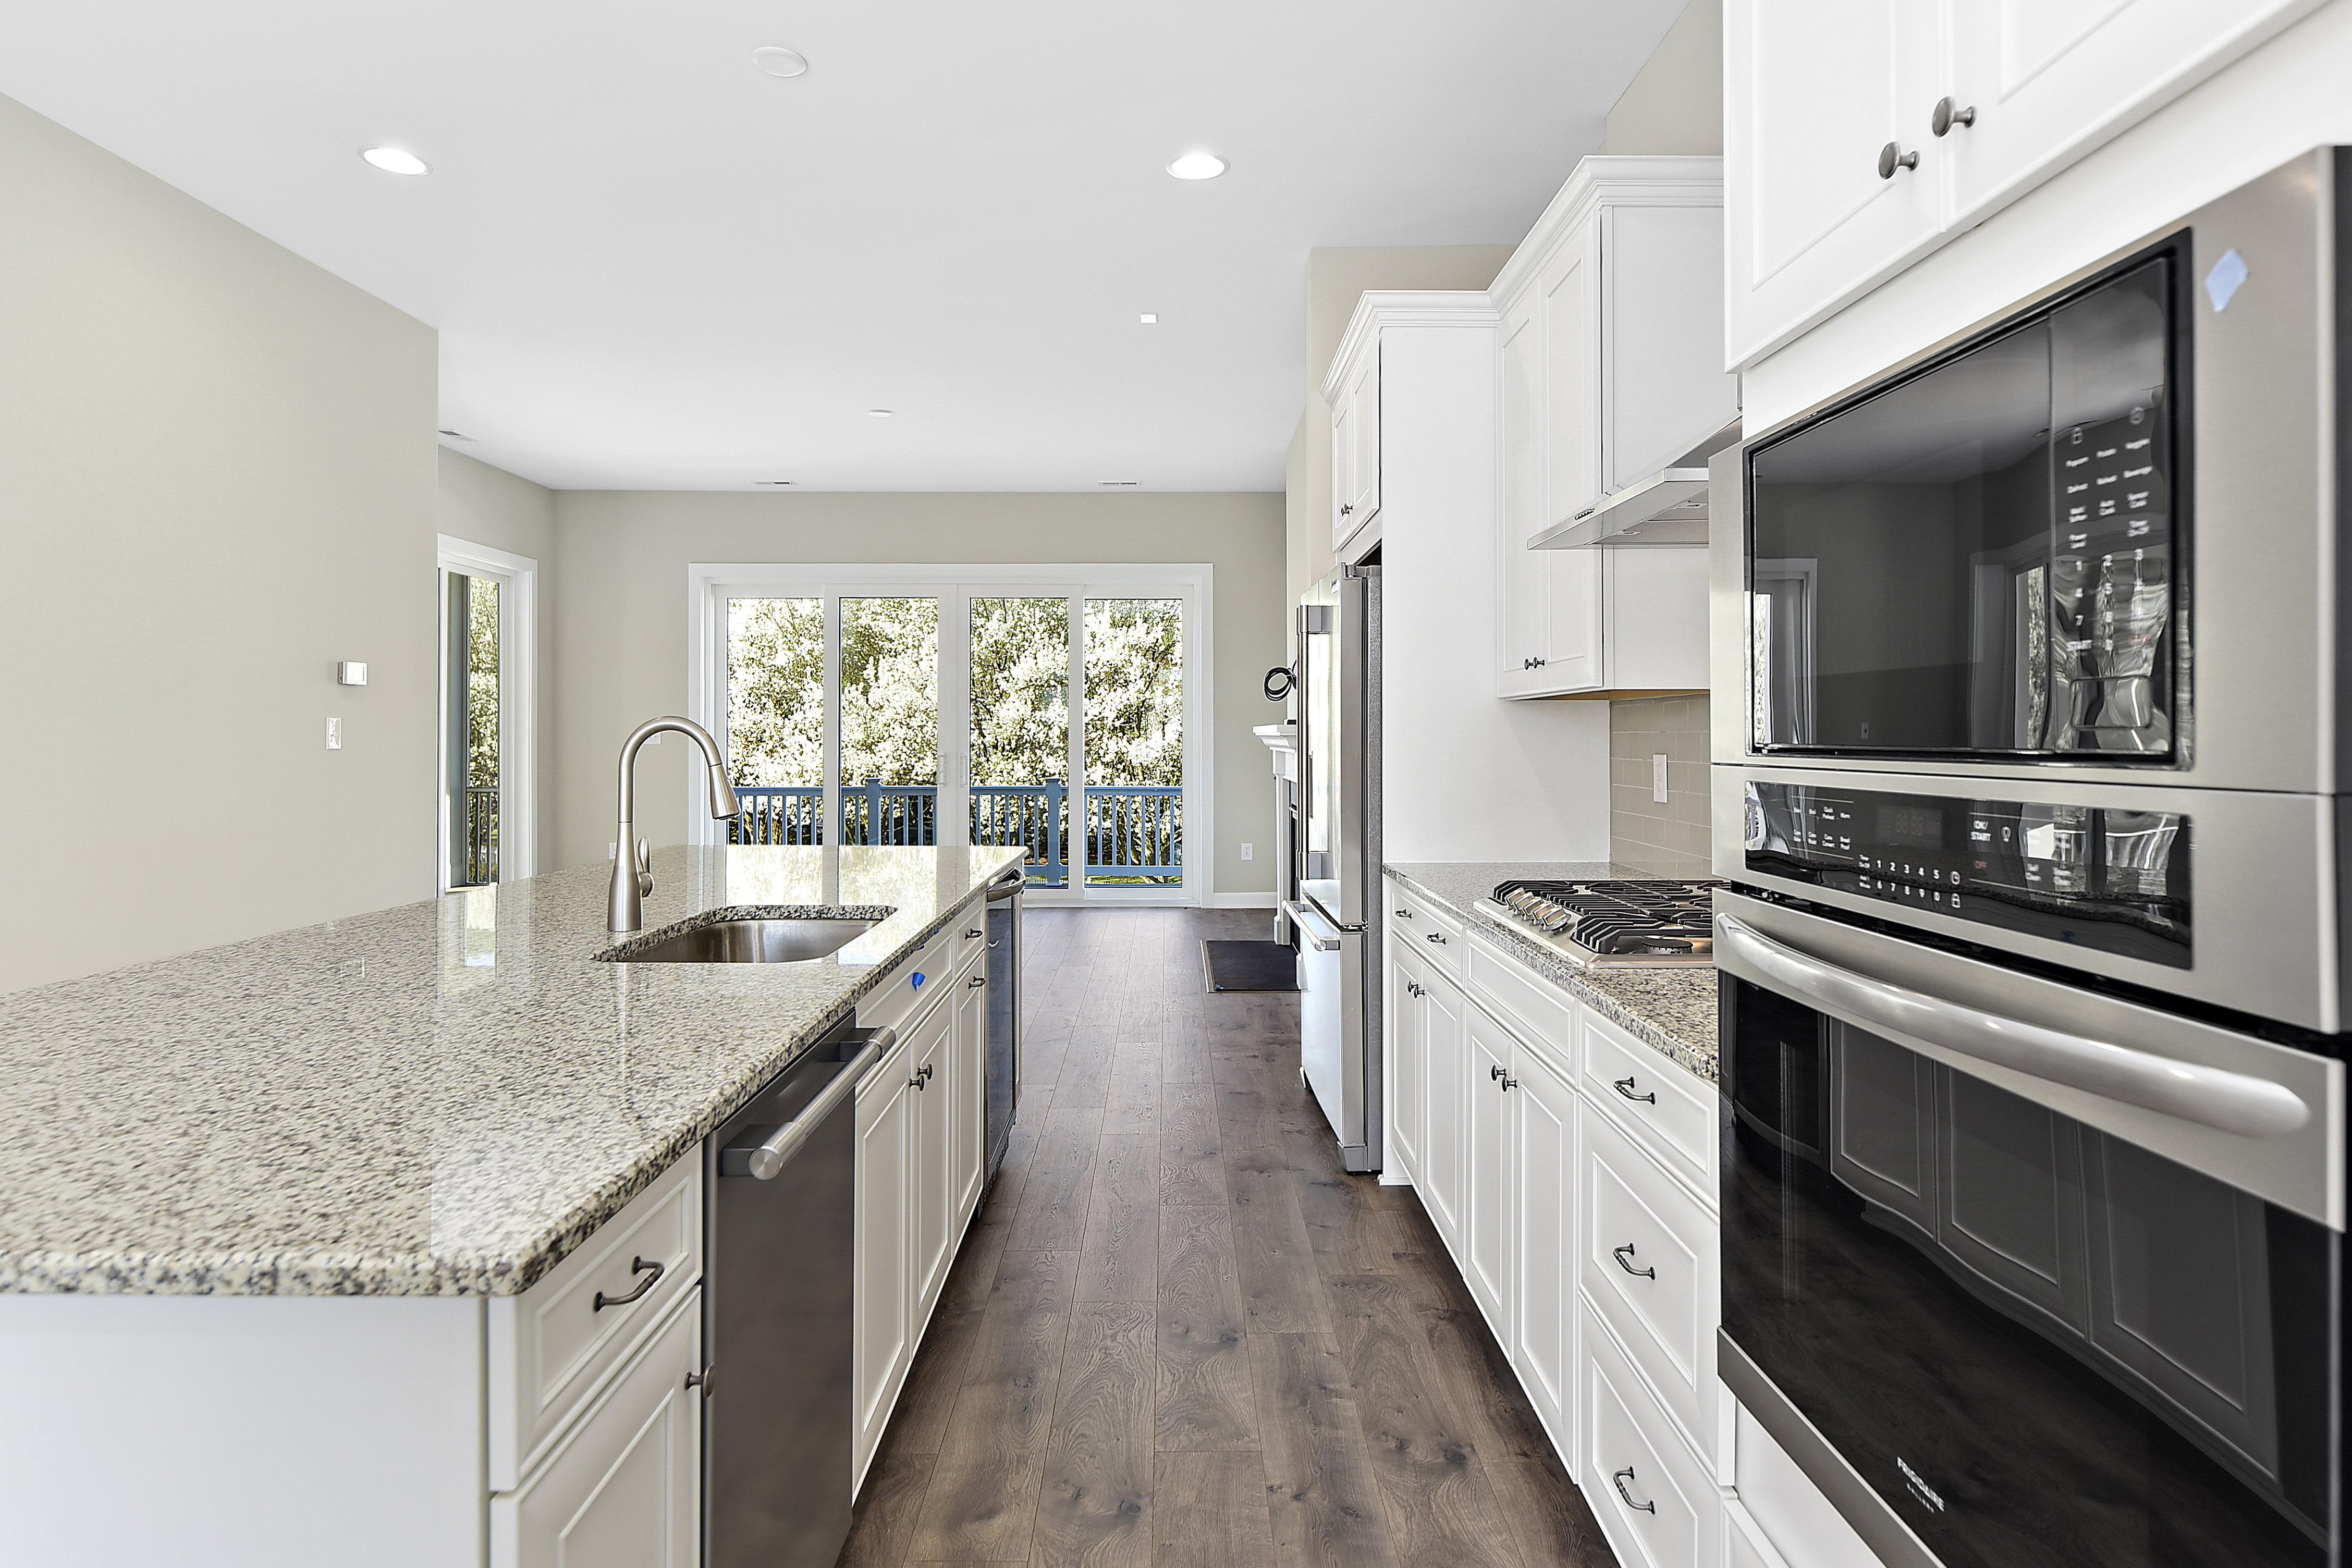 Oven, dishwasher and large kitchen island in kitchen of Turnstone home